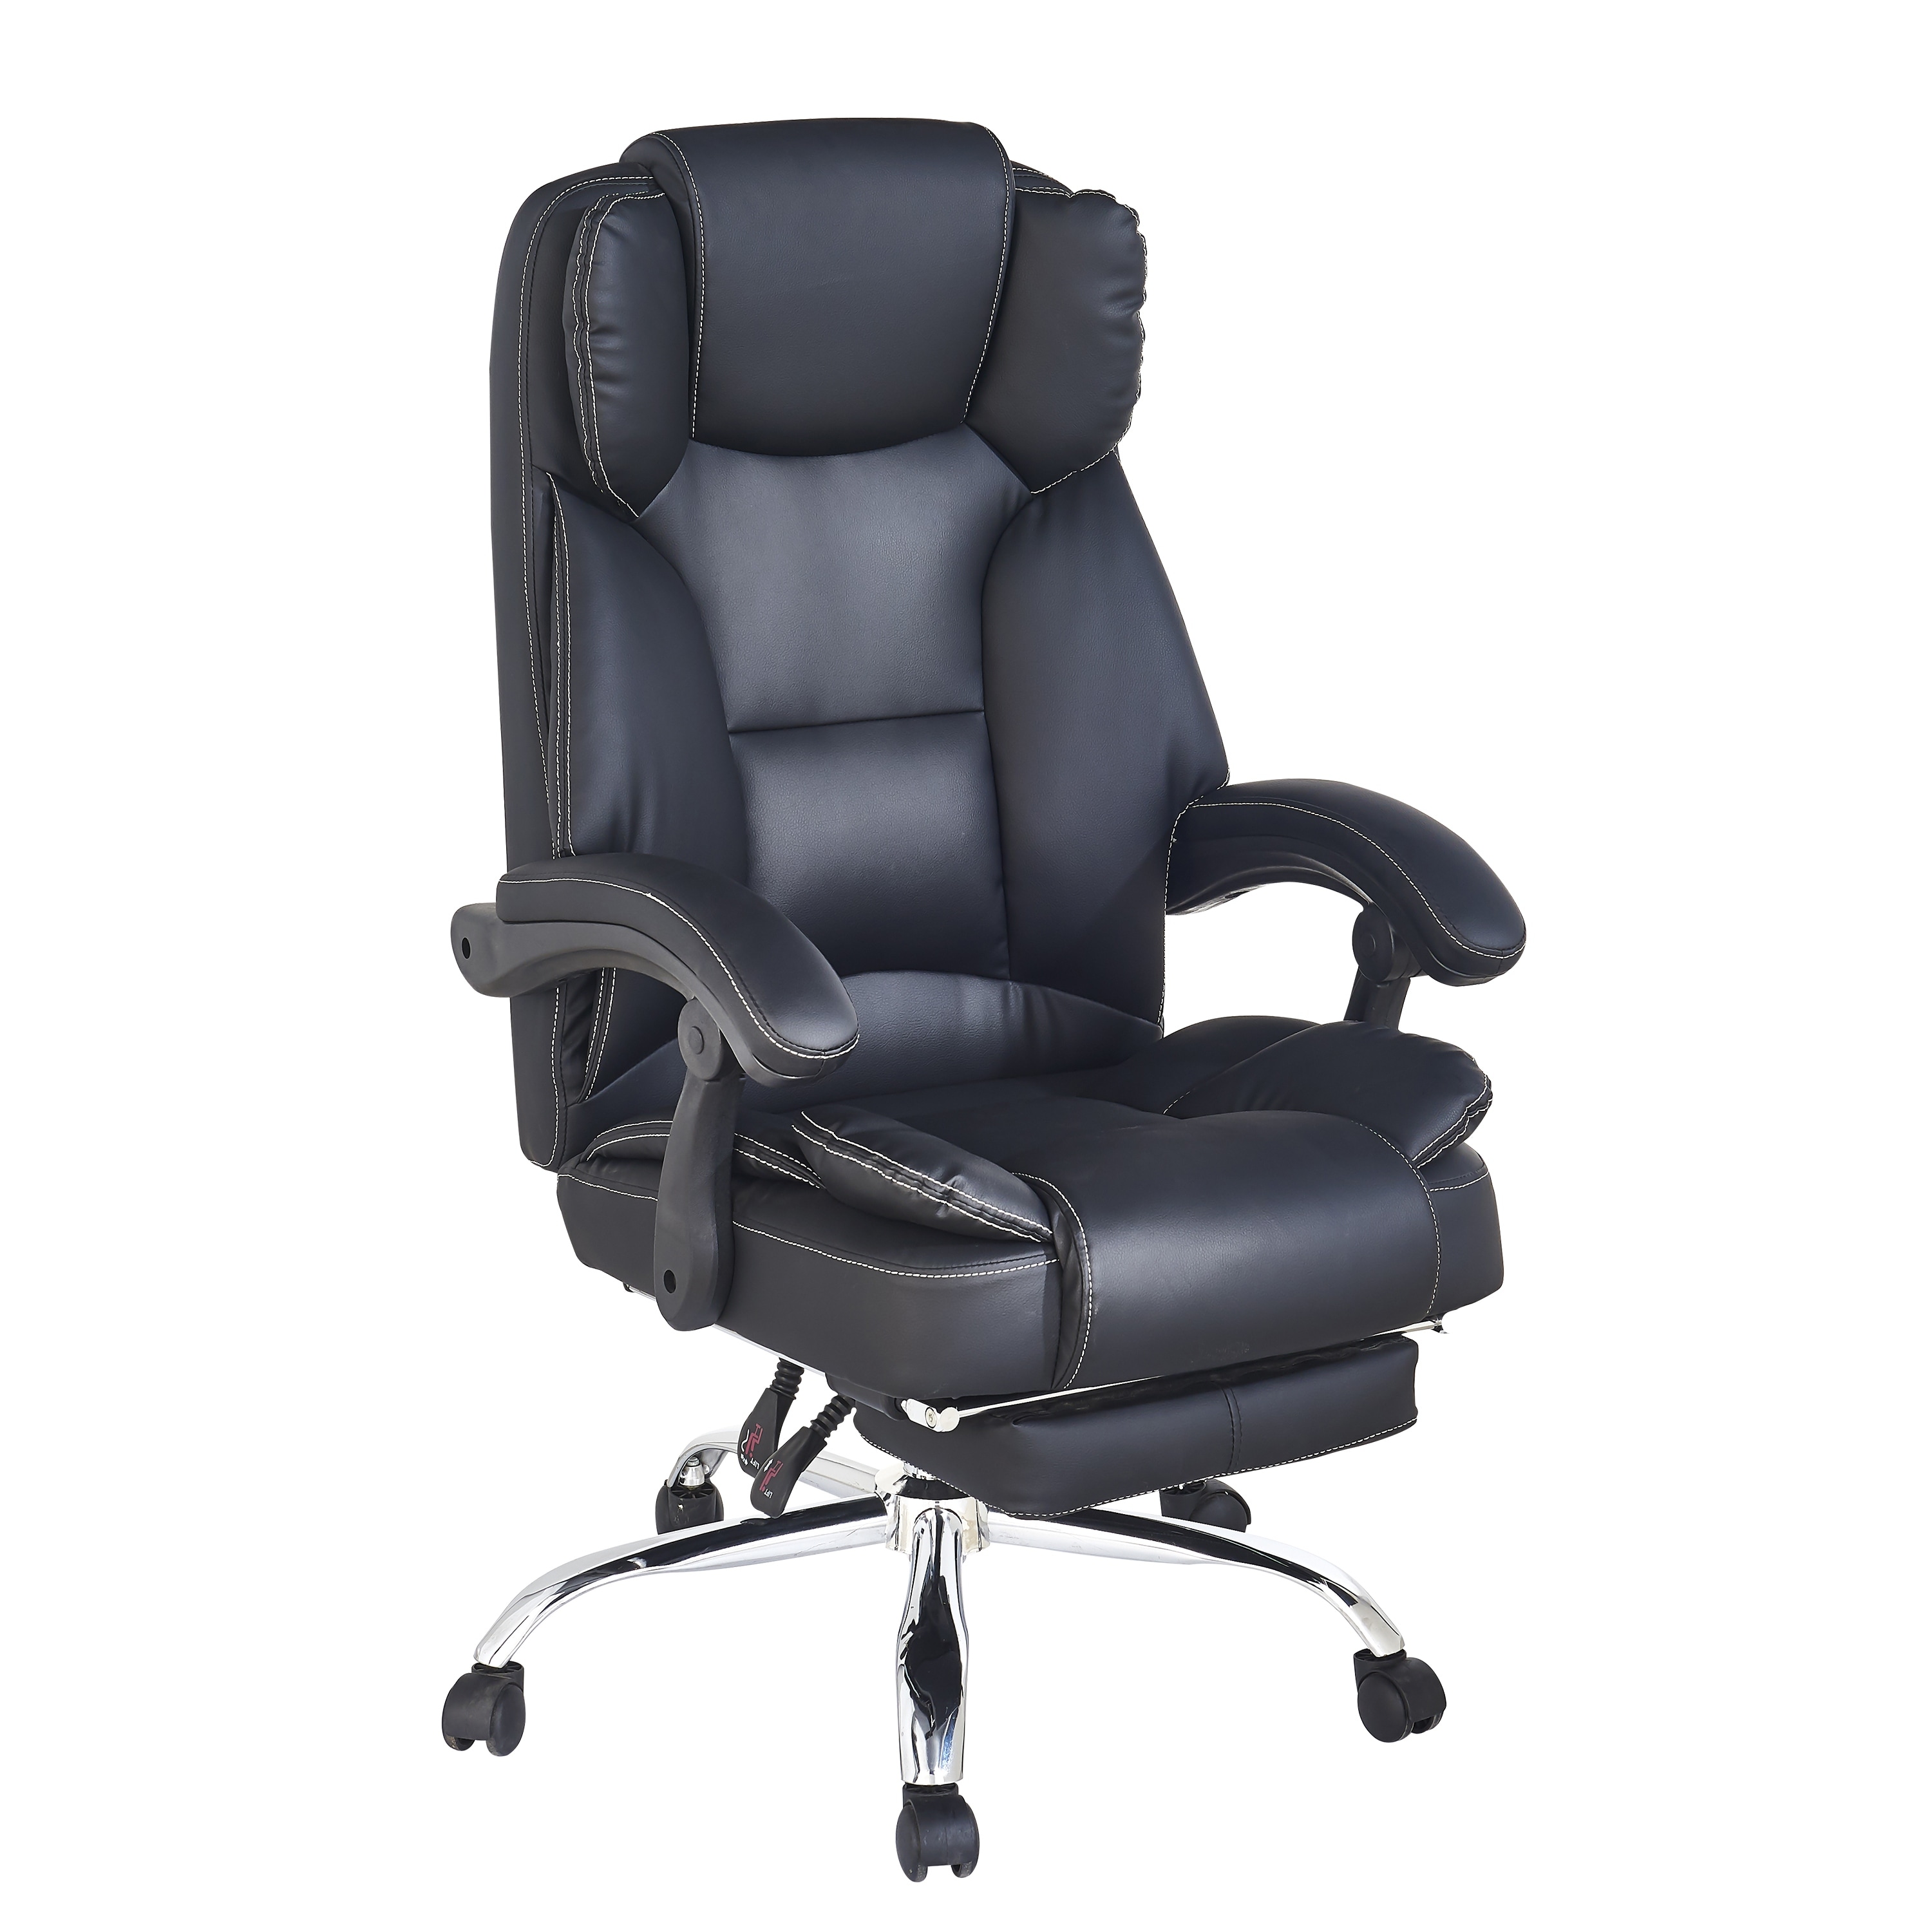 https://ak1.ostkcdn.com/images/products/is/images/direct/88541e9749d3c948748fd2828309f229869c92af/Ergonomic-Office-Chair-Executive-PU-Leather.jpg